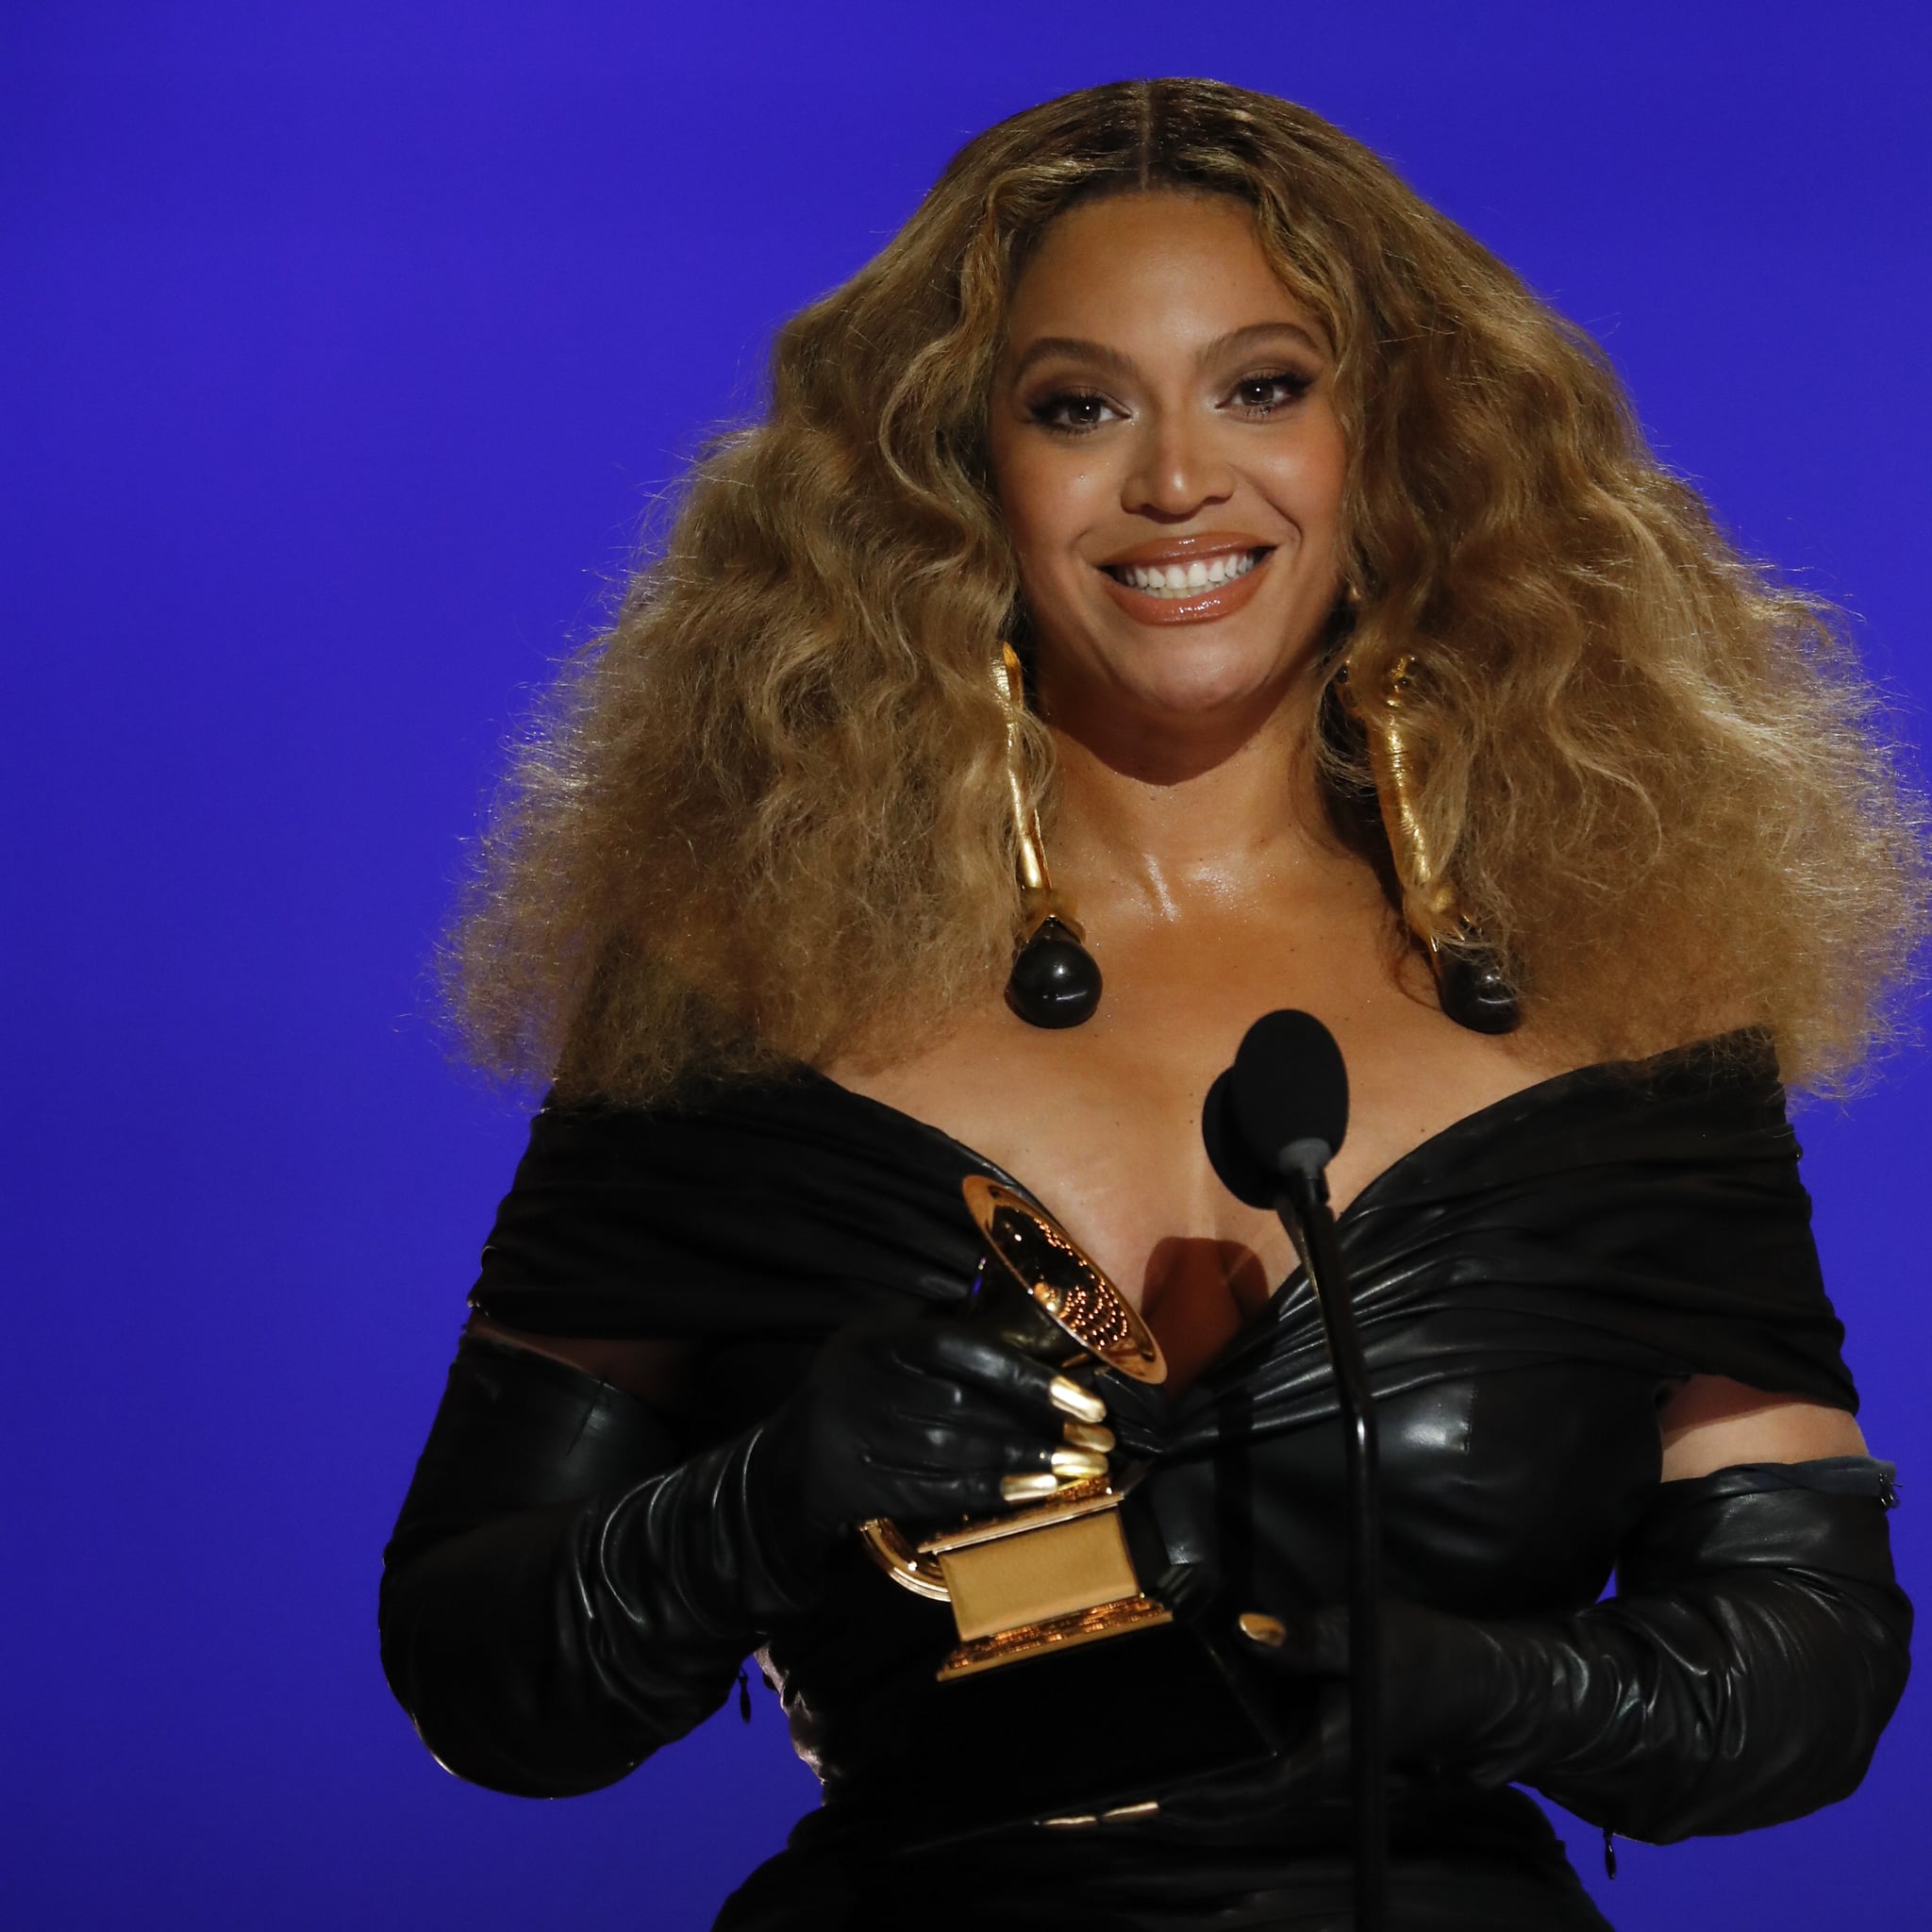 Beyoncé's Throwback Photos From the AMAs Will Make You Ring the Alarm